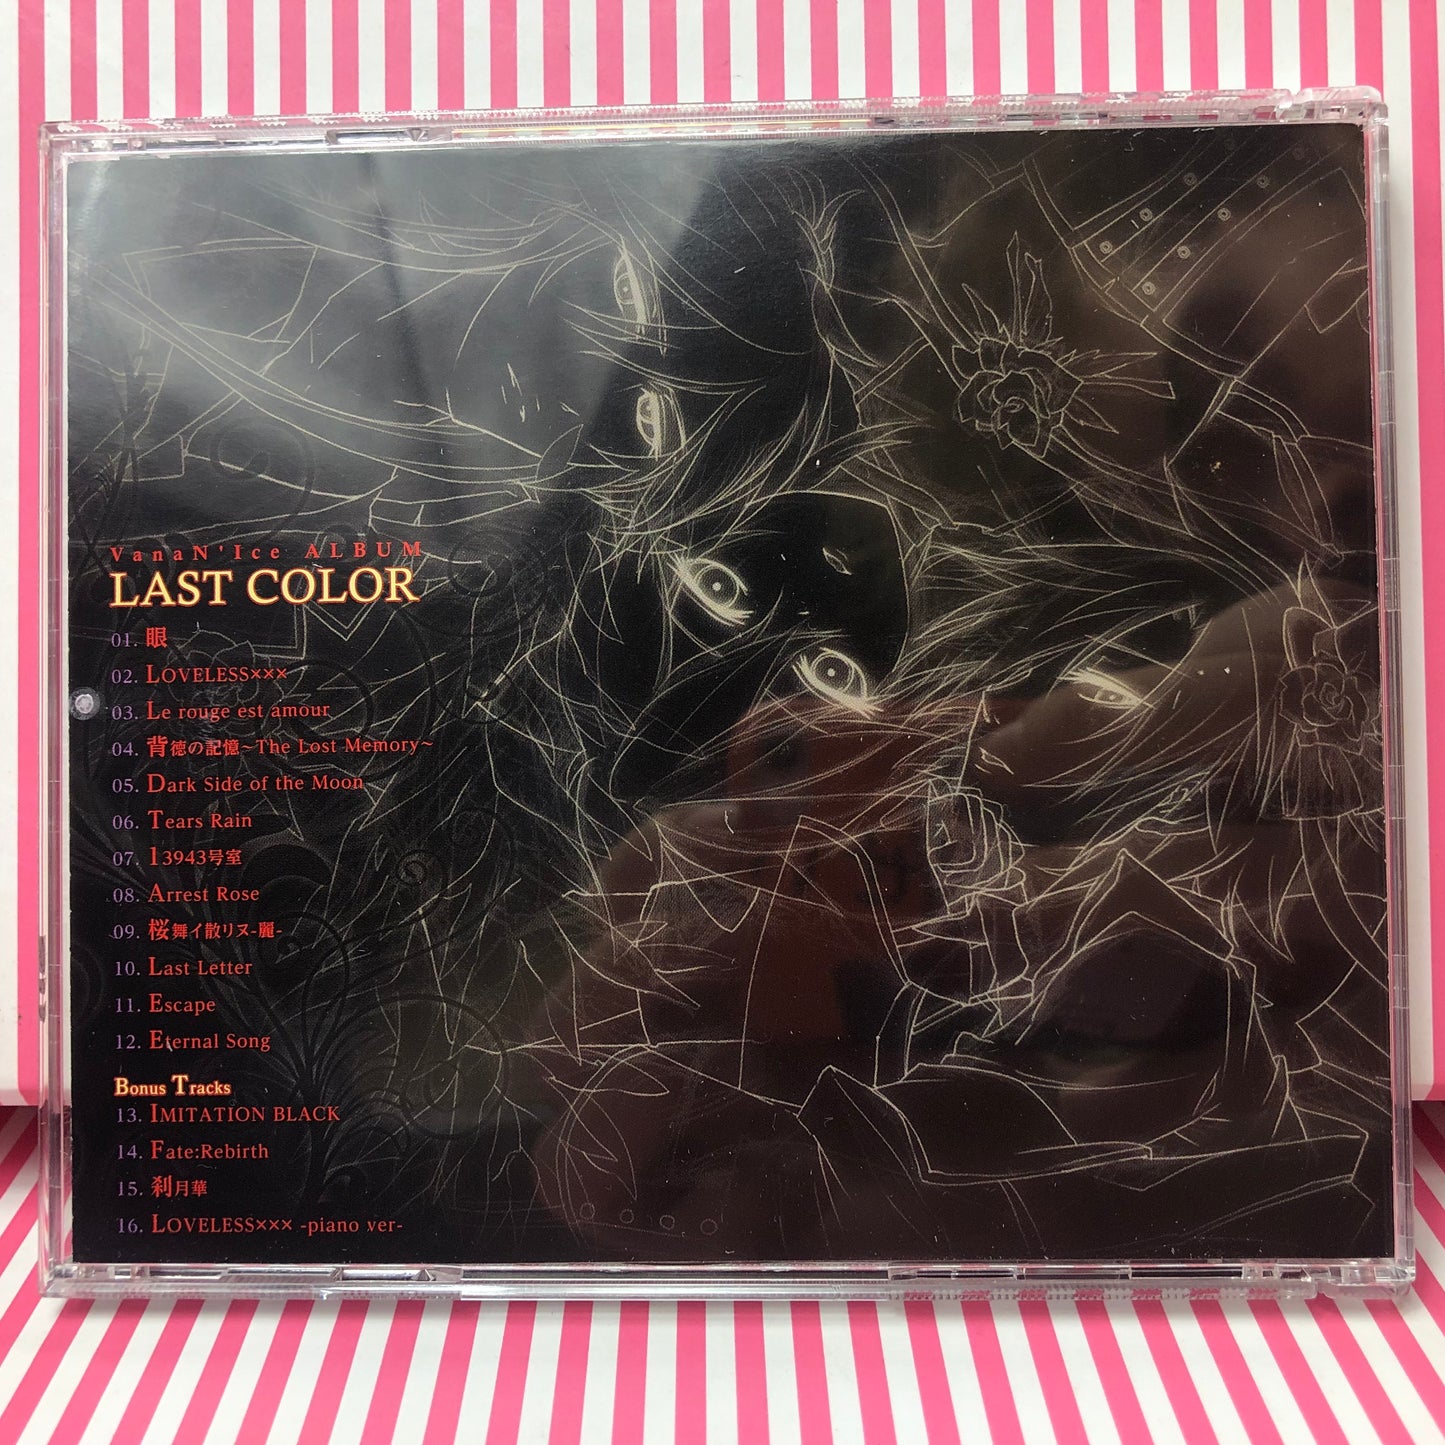 Vanan'ice (NatsuP / Project SCL) - Last Color Vocaloid CD